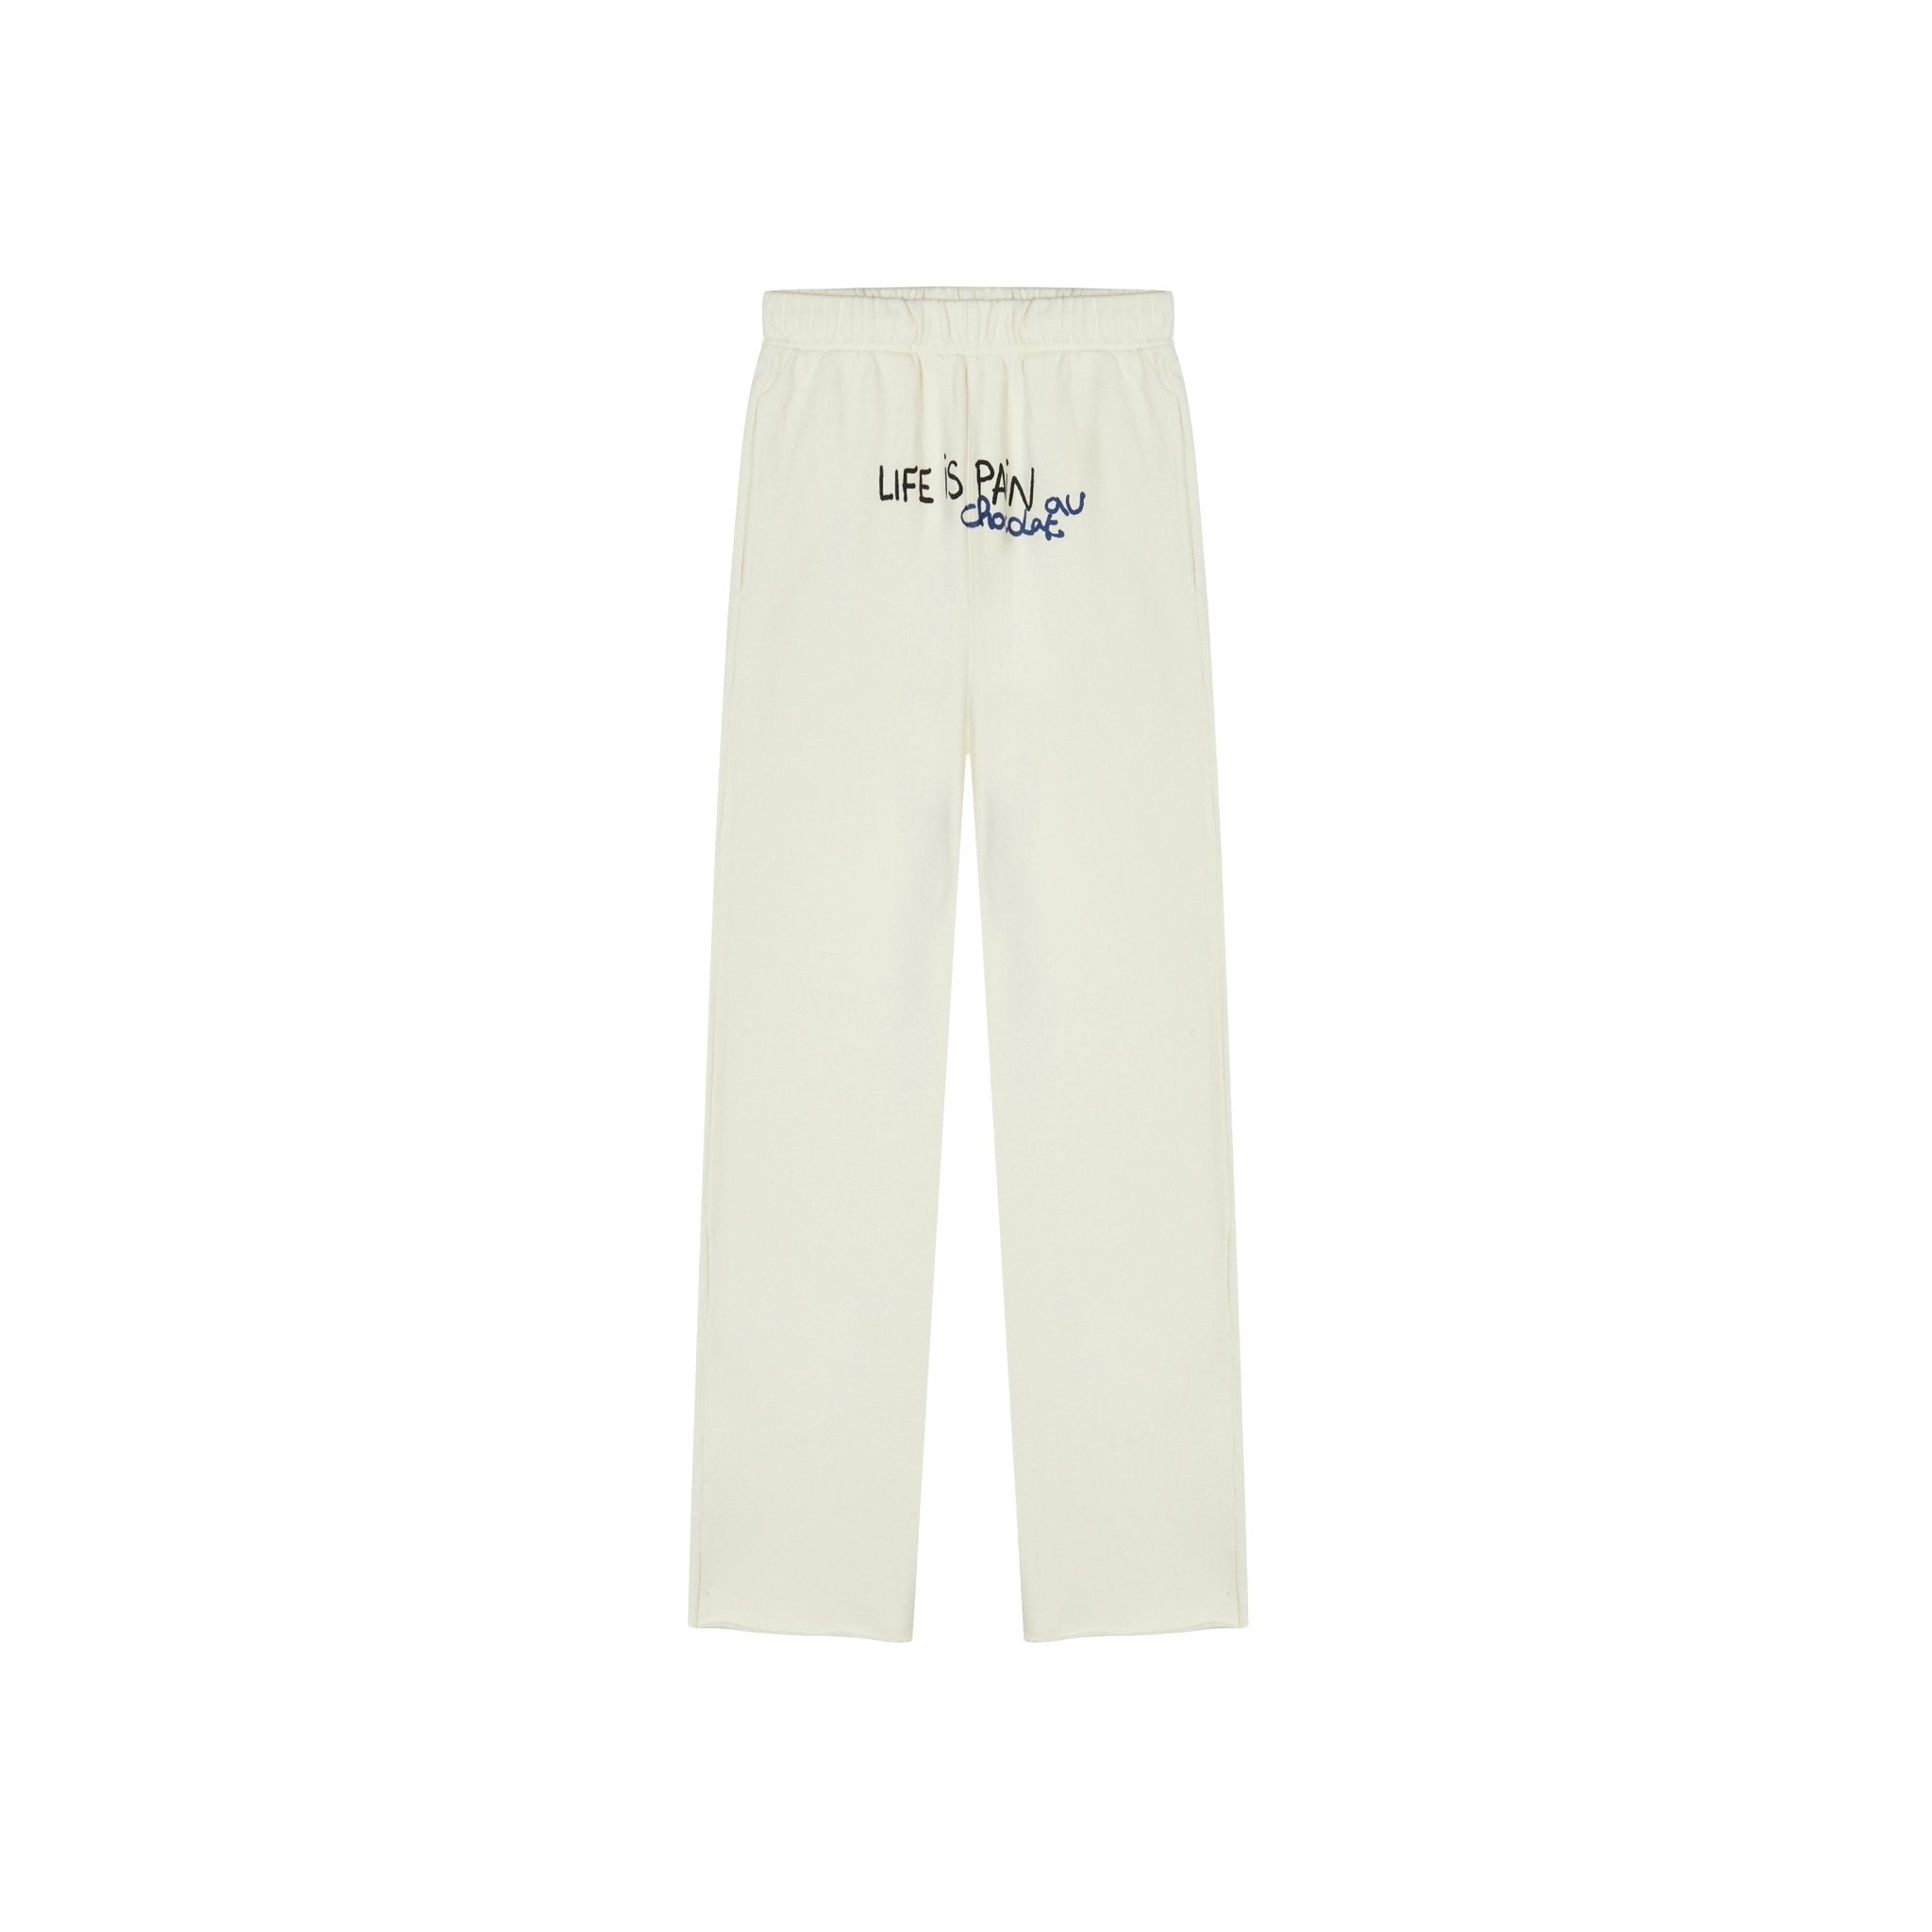 ANN ANDELMAN White 'Life is Pain' Pants | MADA IN CHINA